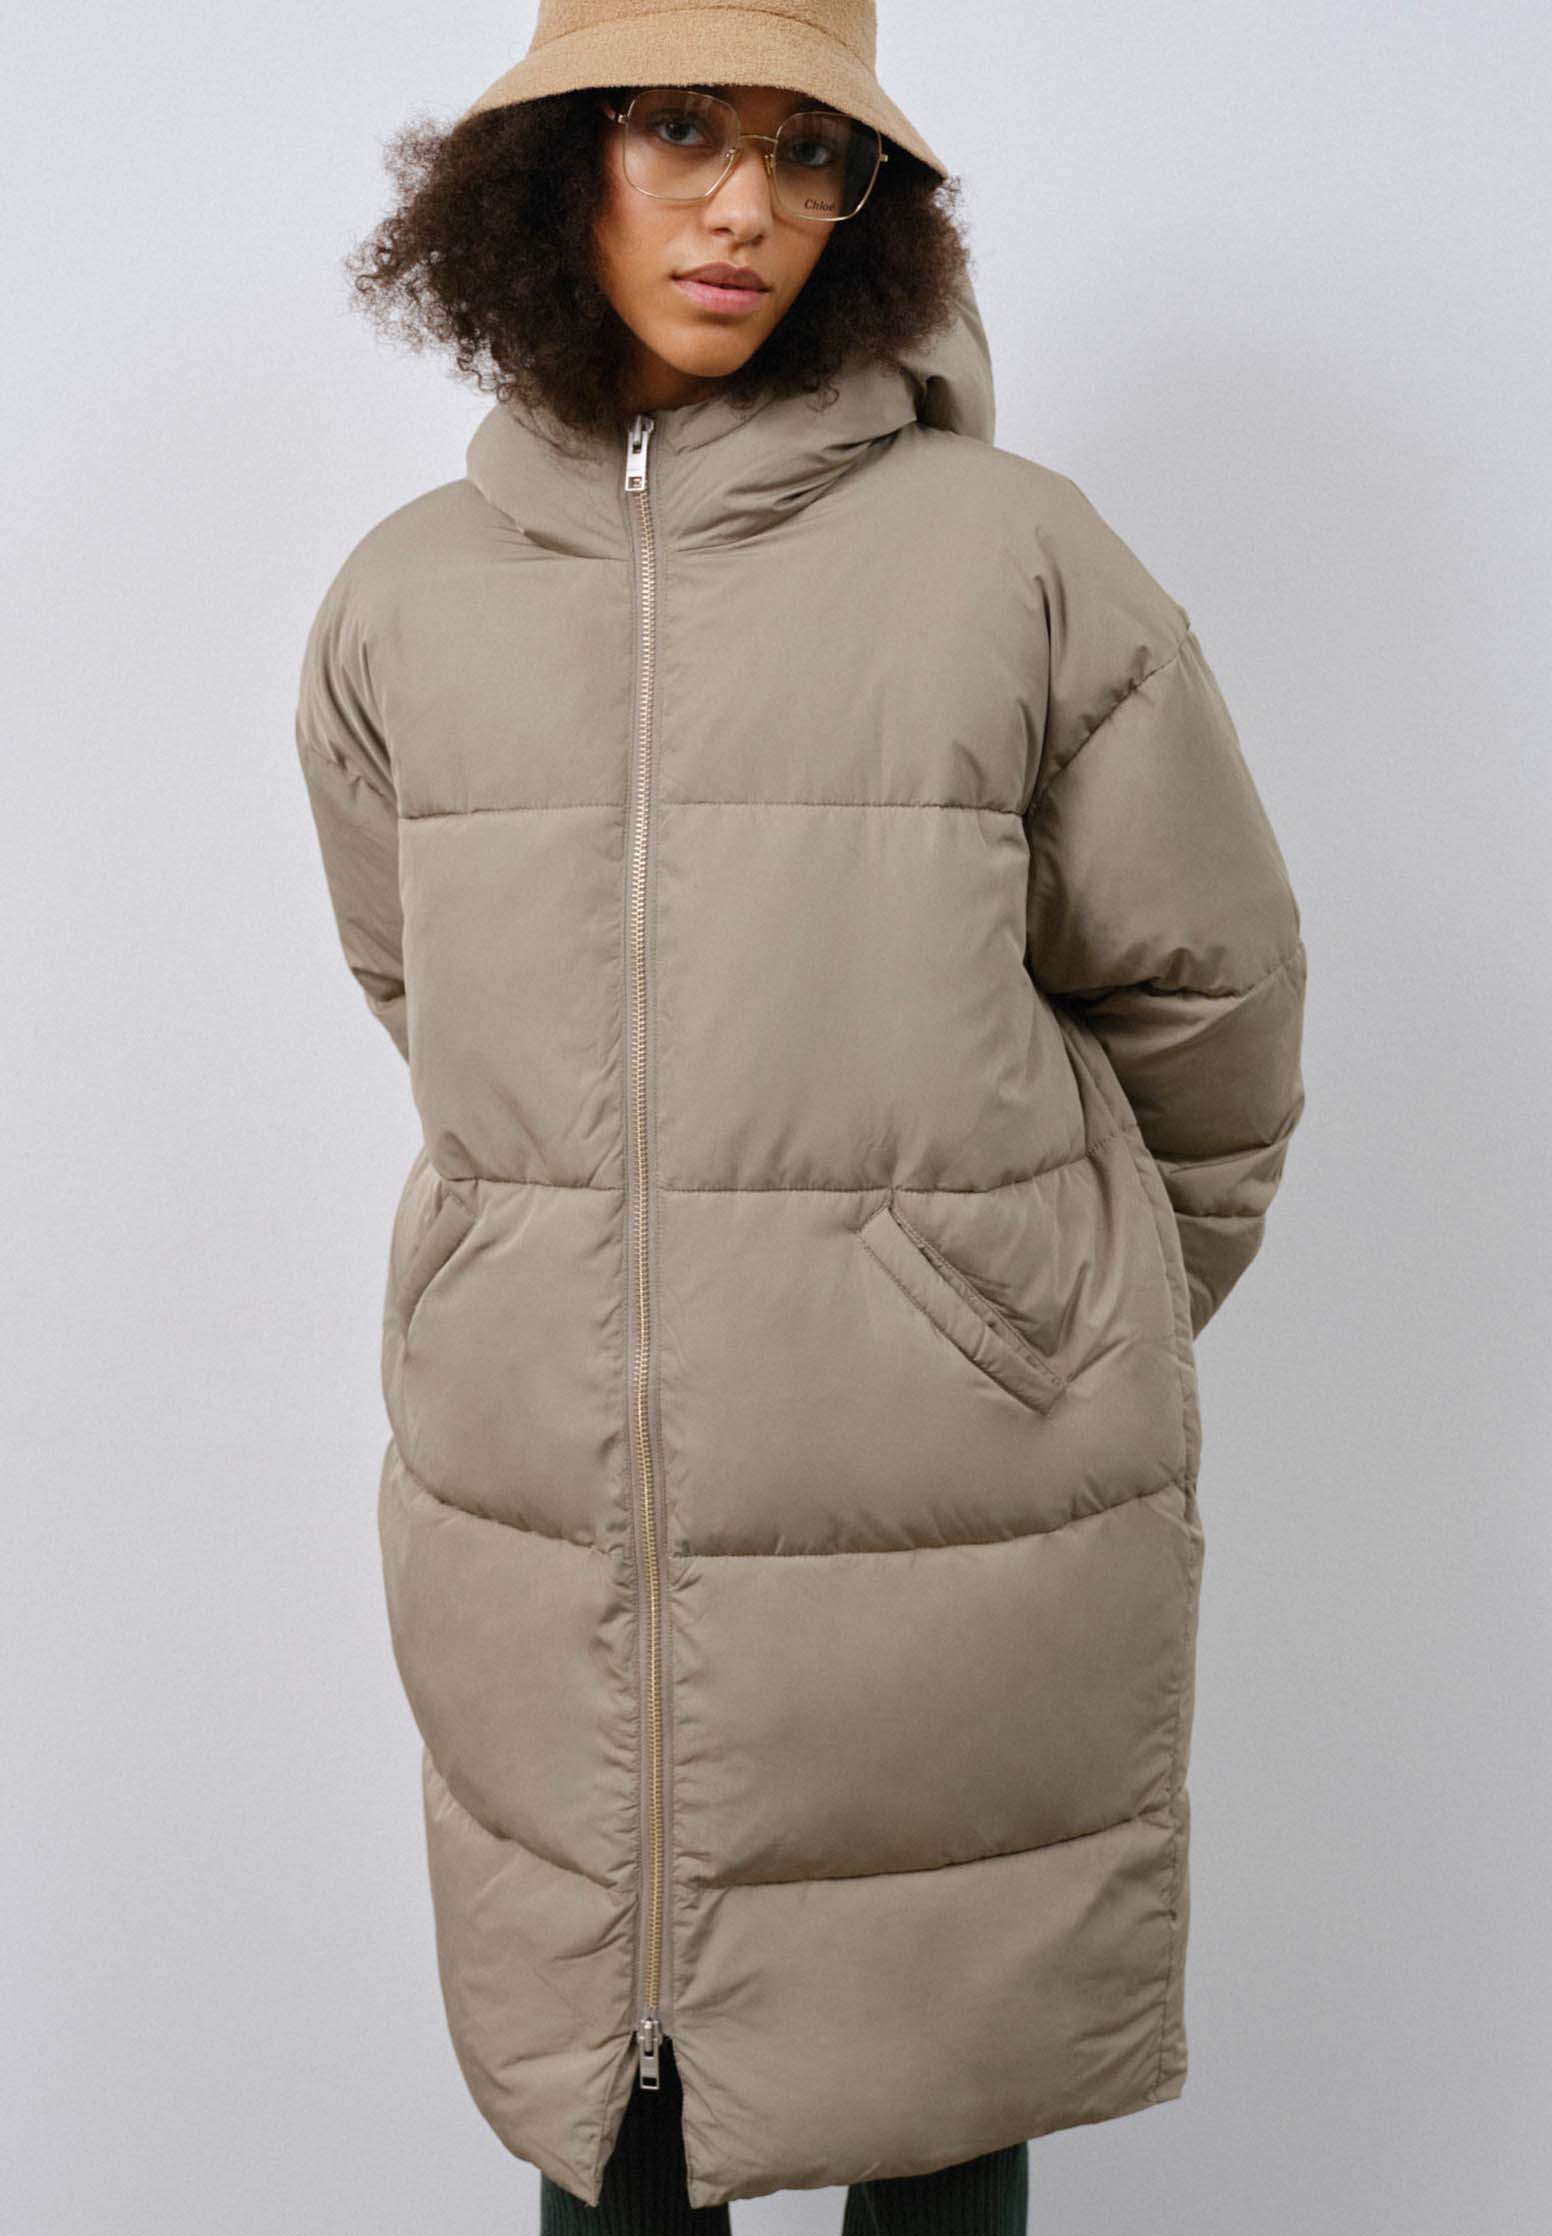 EMBASSY OF BRICKS AND LOGS Elphin Puffer Coat pale olive XS